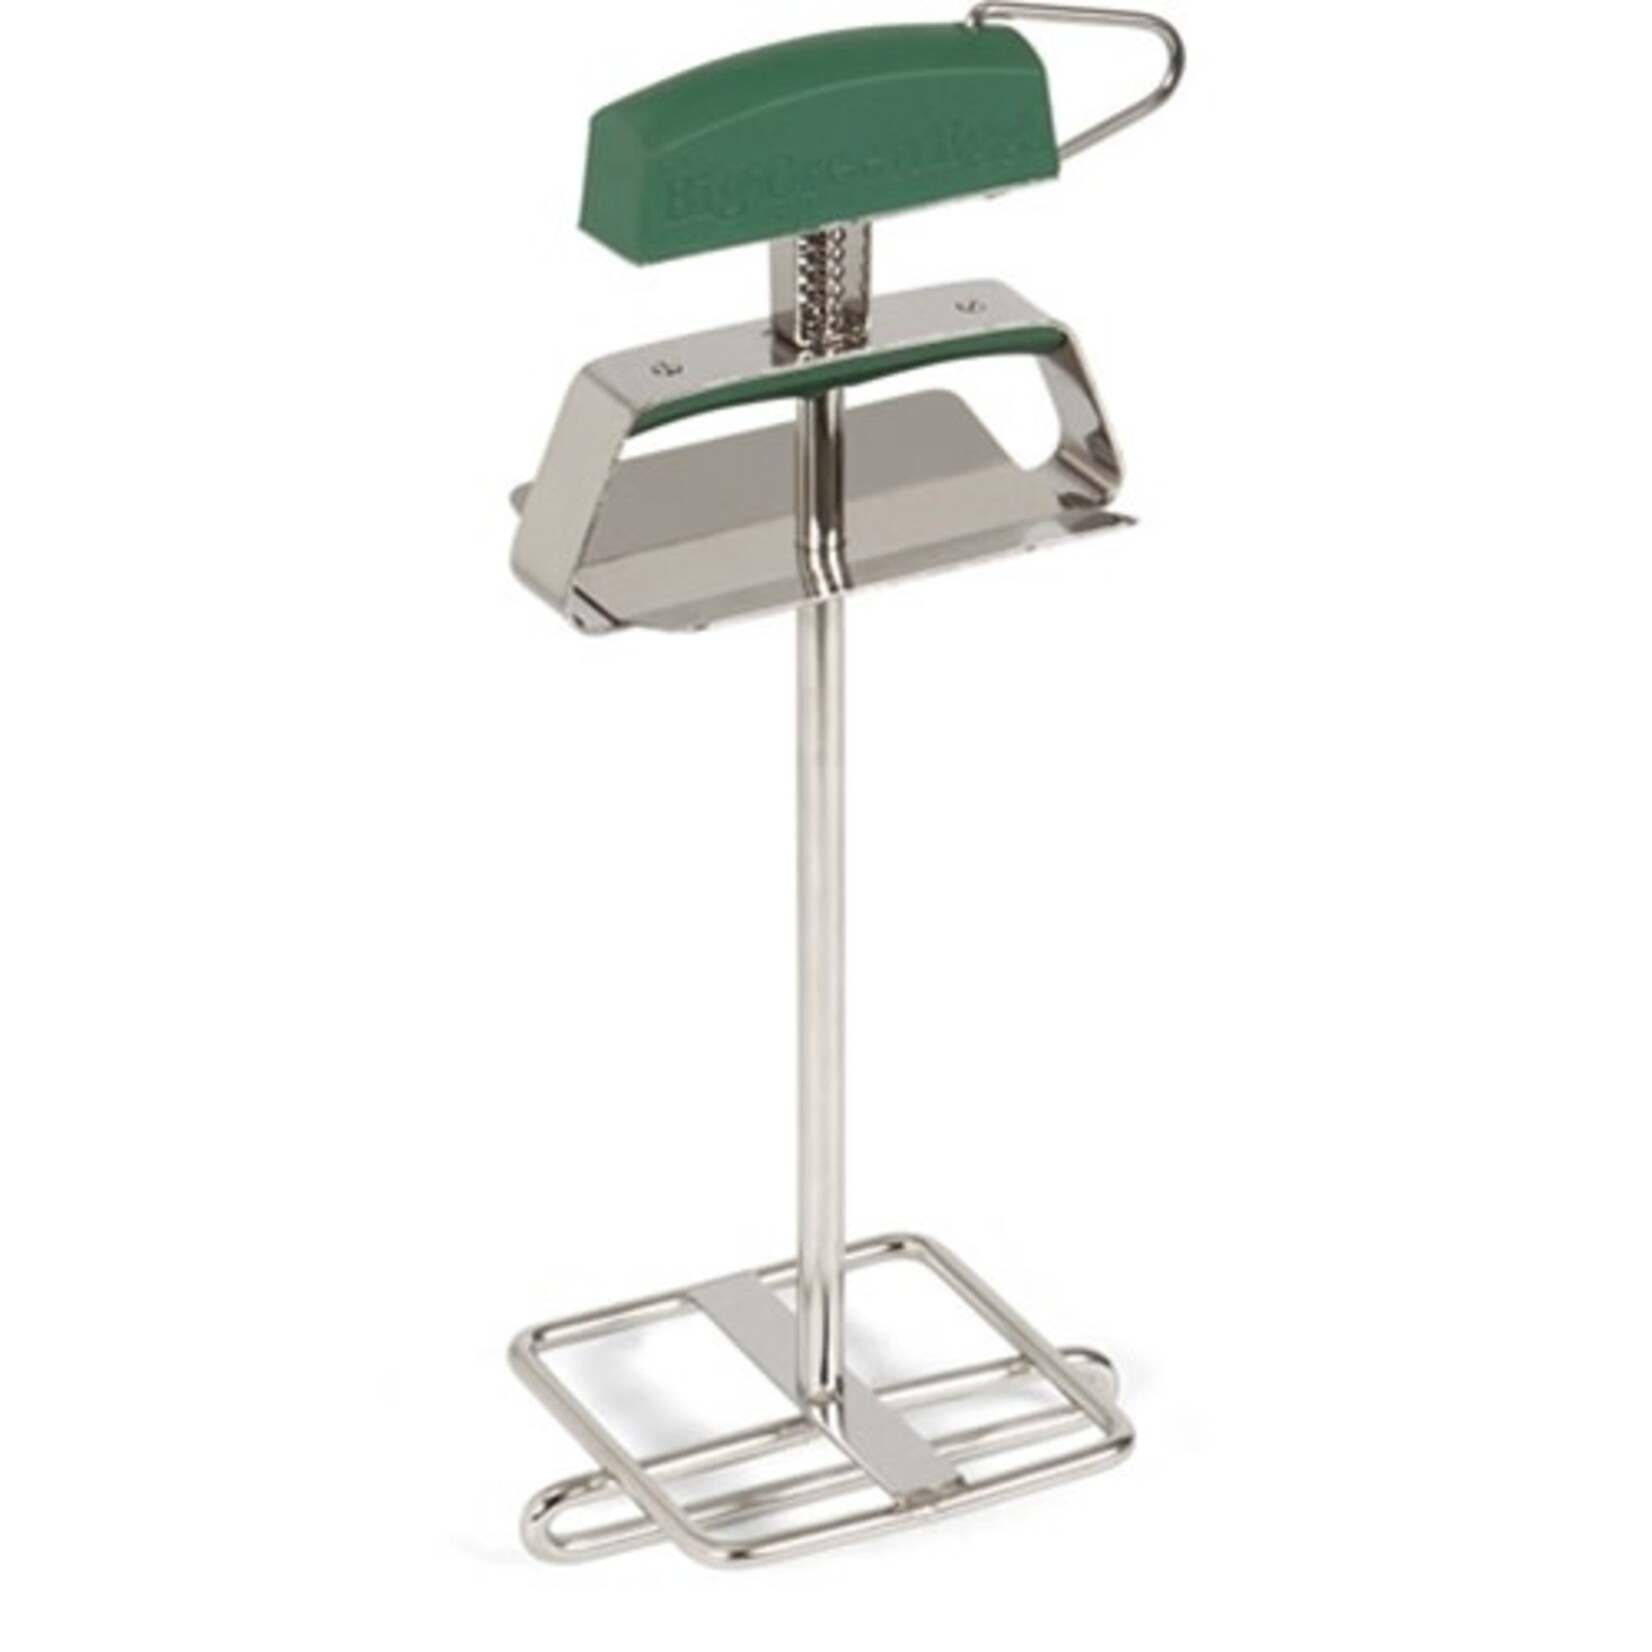 Green Egg Grid Lifter for cast iron grates